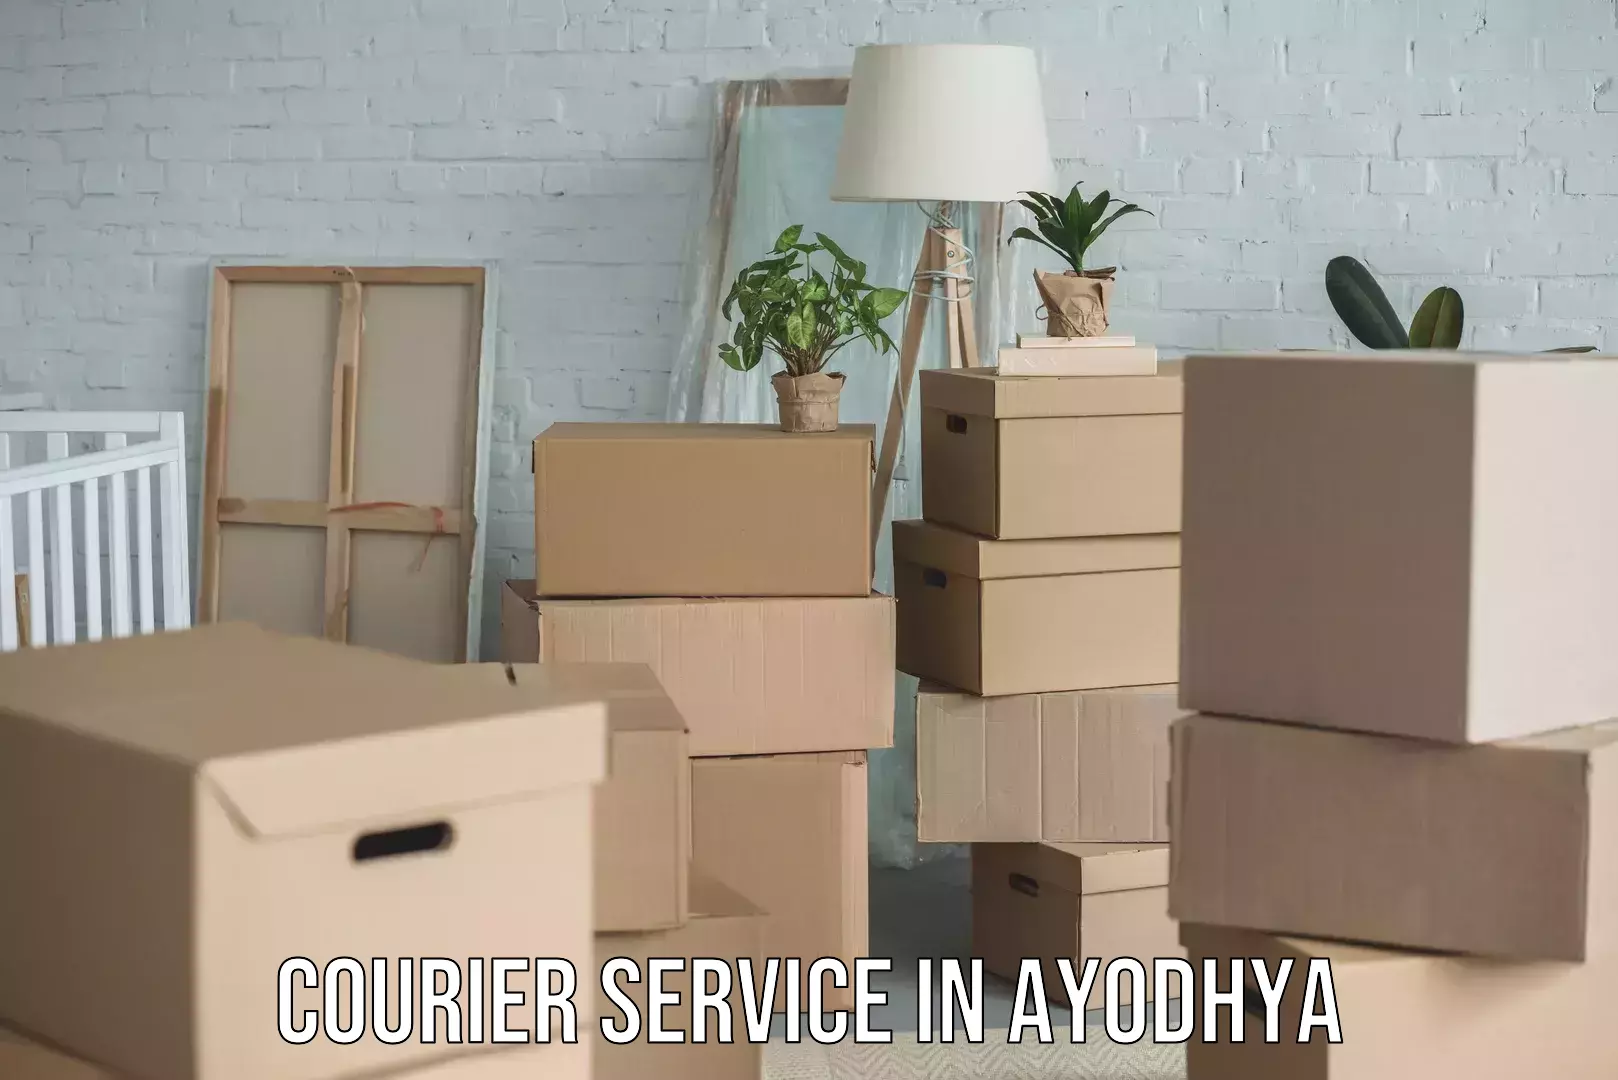 24-hour courier services in Ayodhya